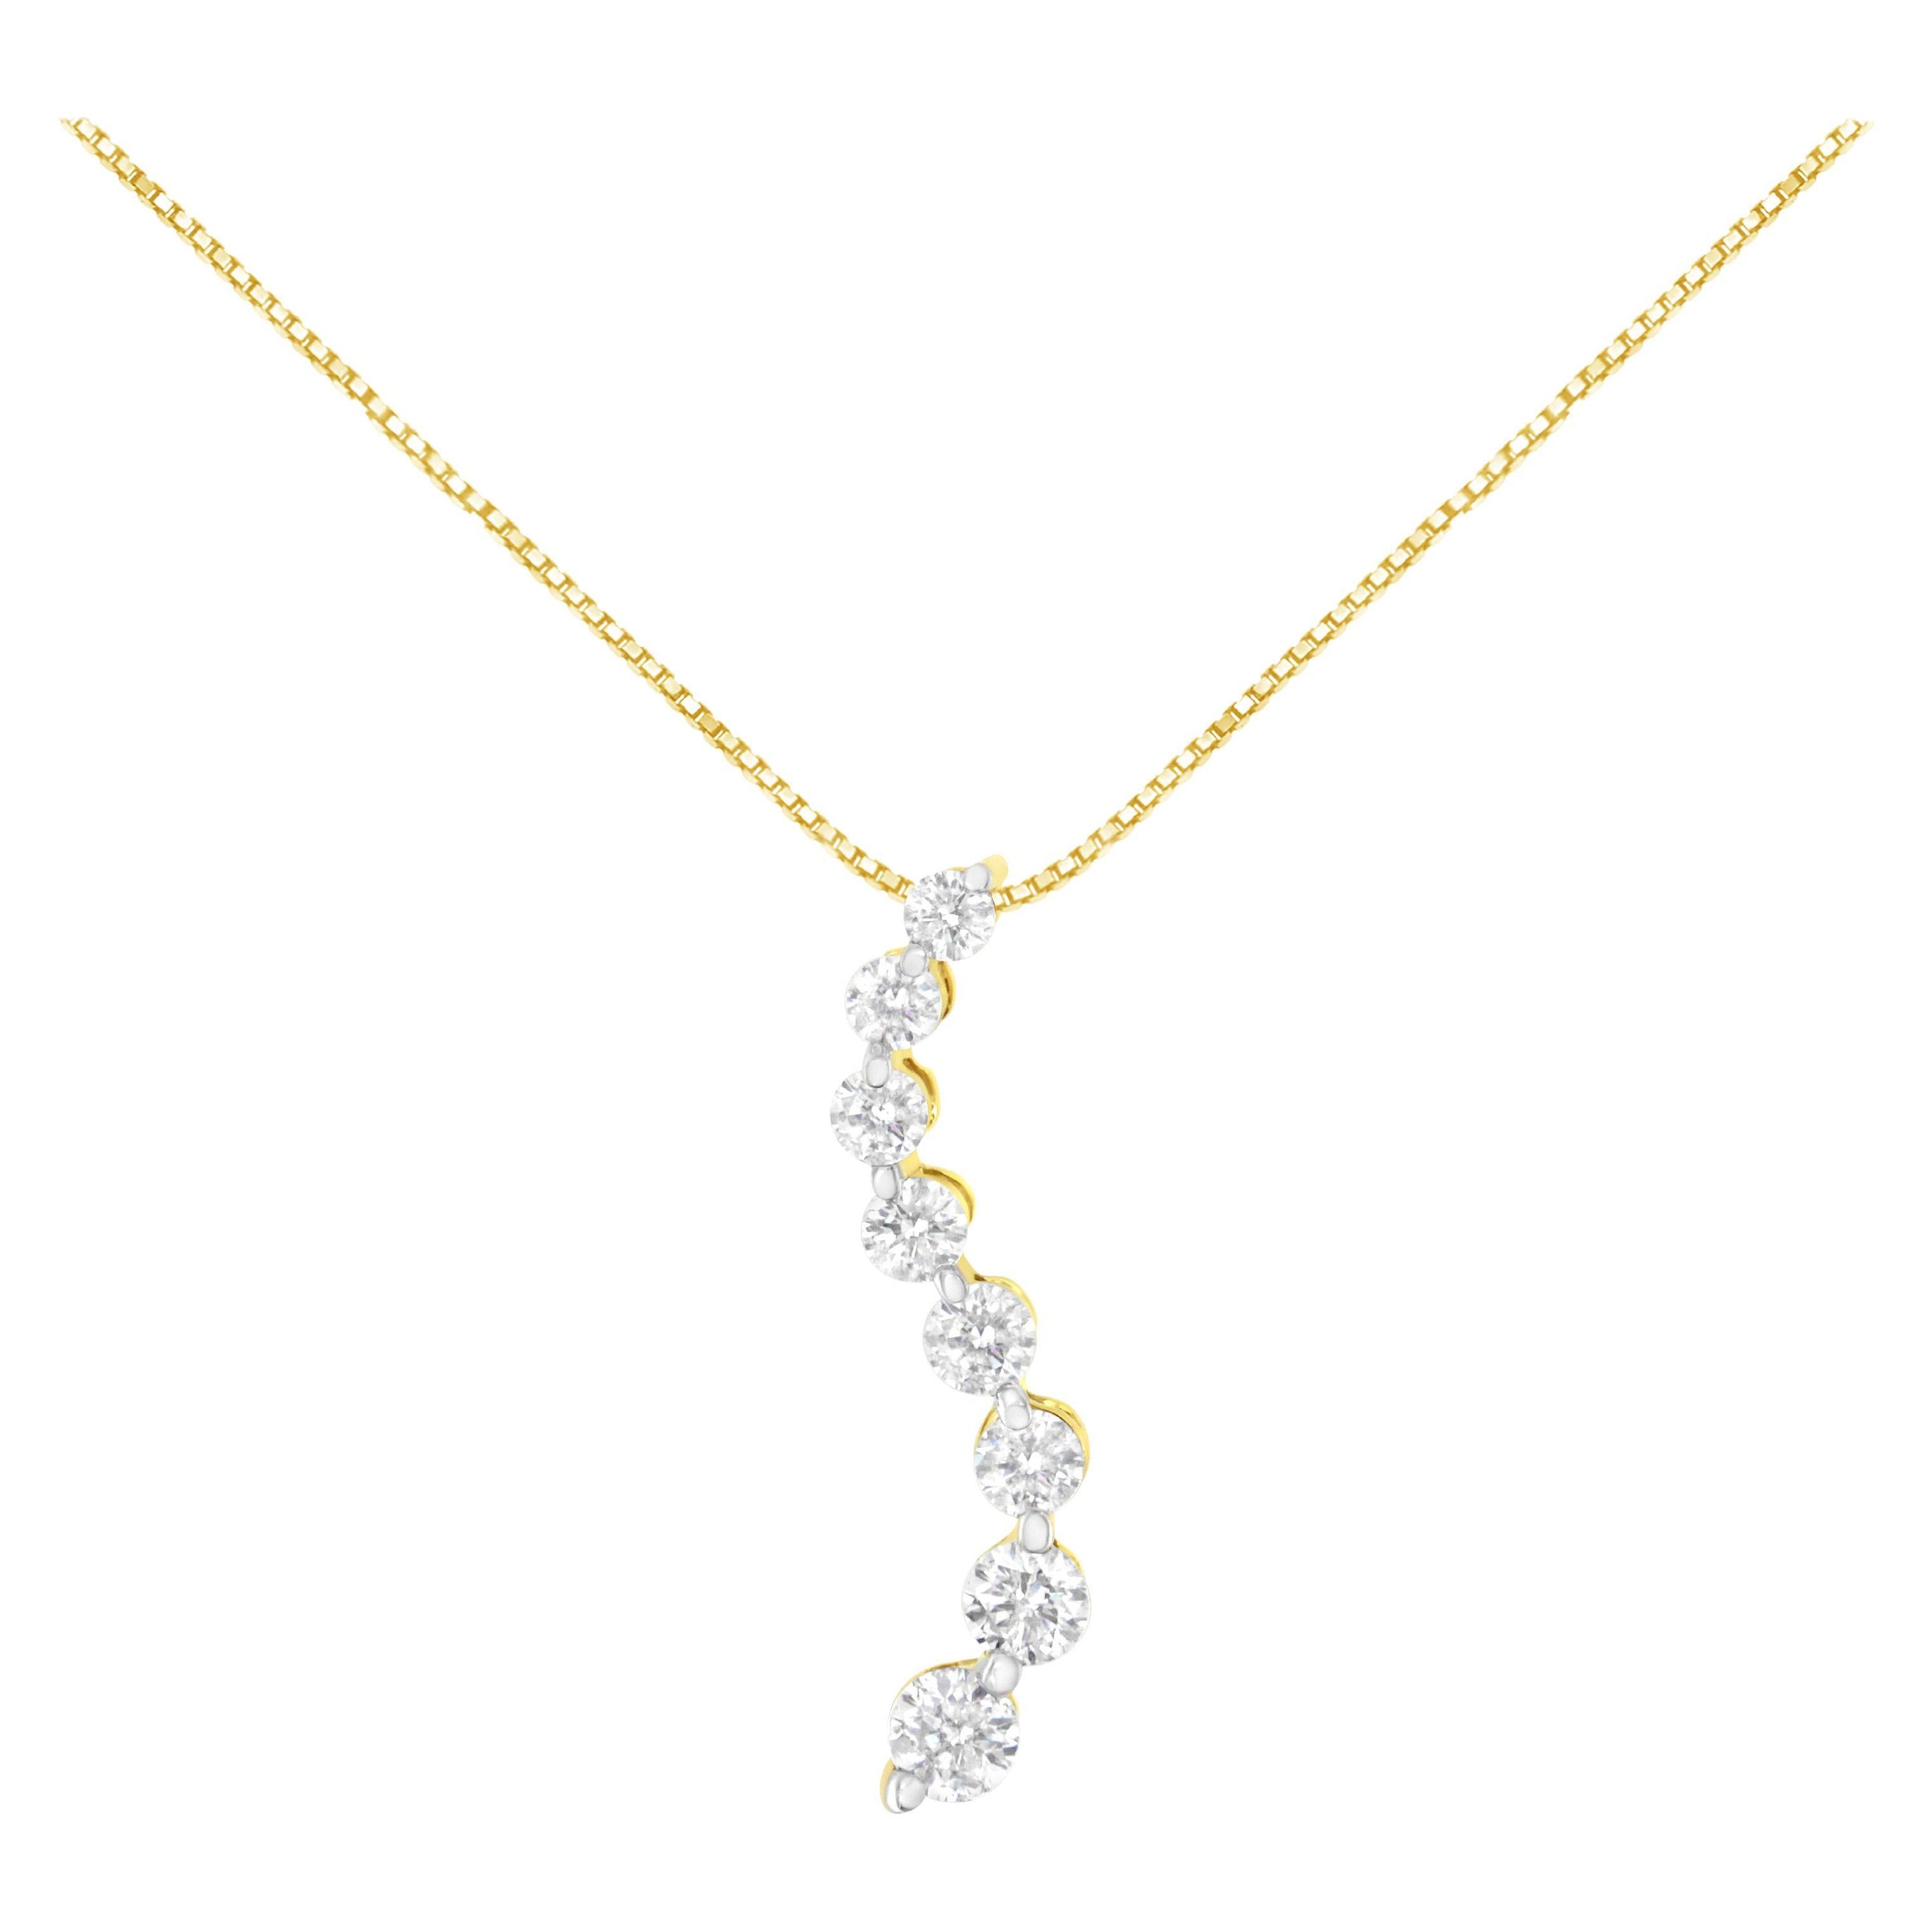 AGS Certified 14K Yellow Gold 3.0 Carat Diamond Journey Pendant Necklace